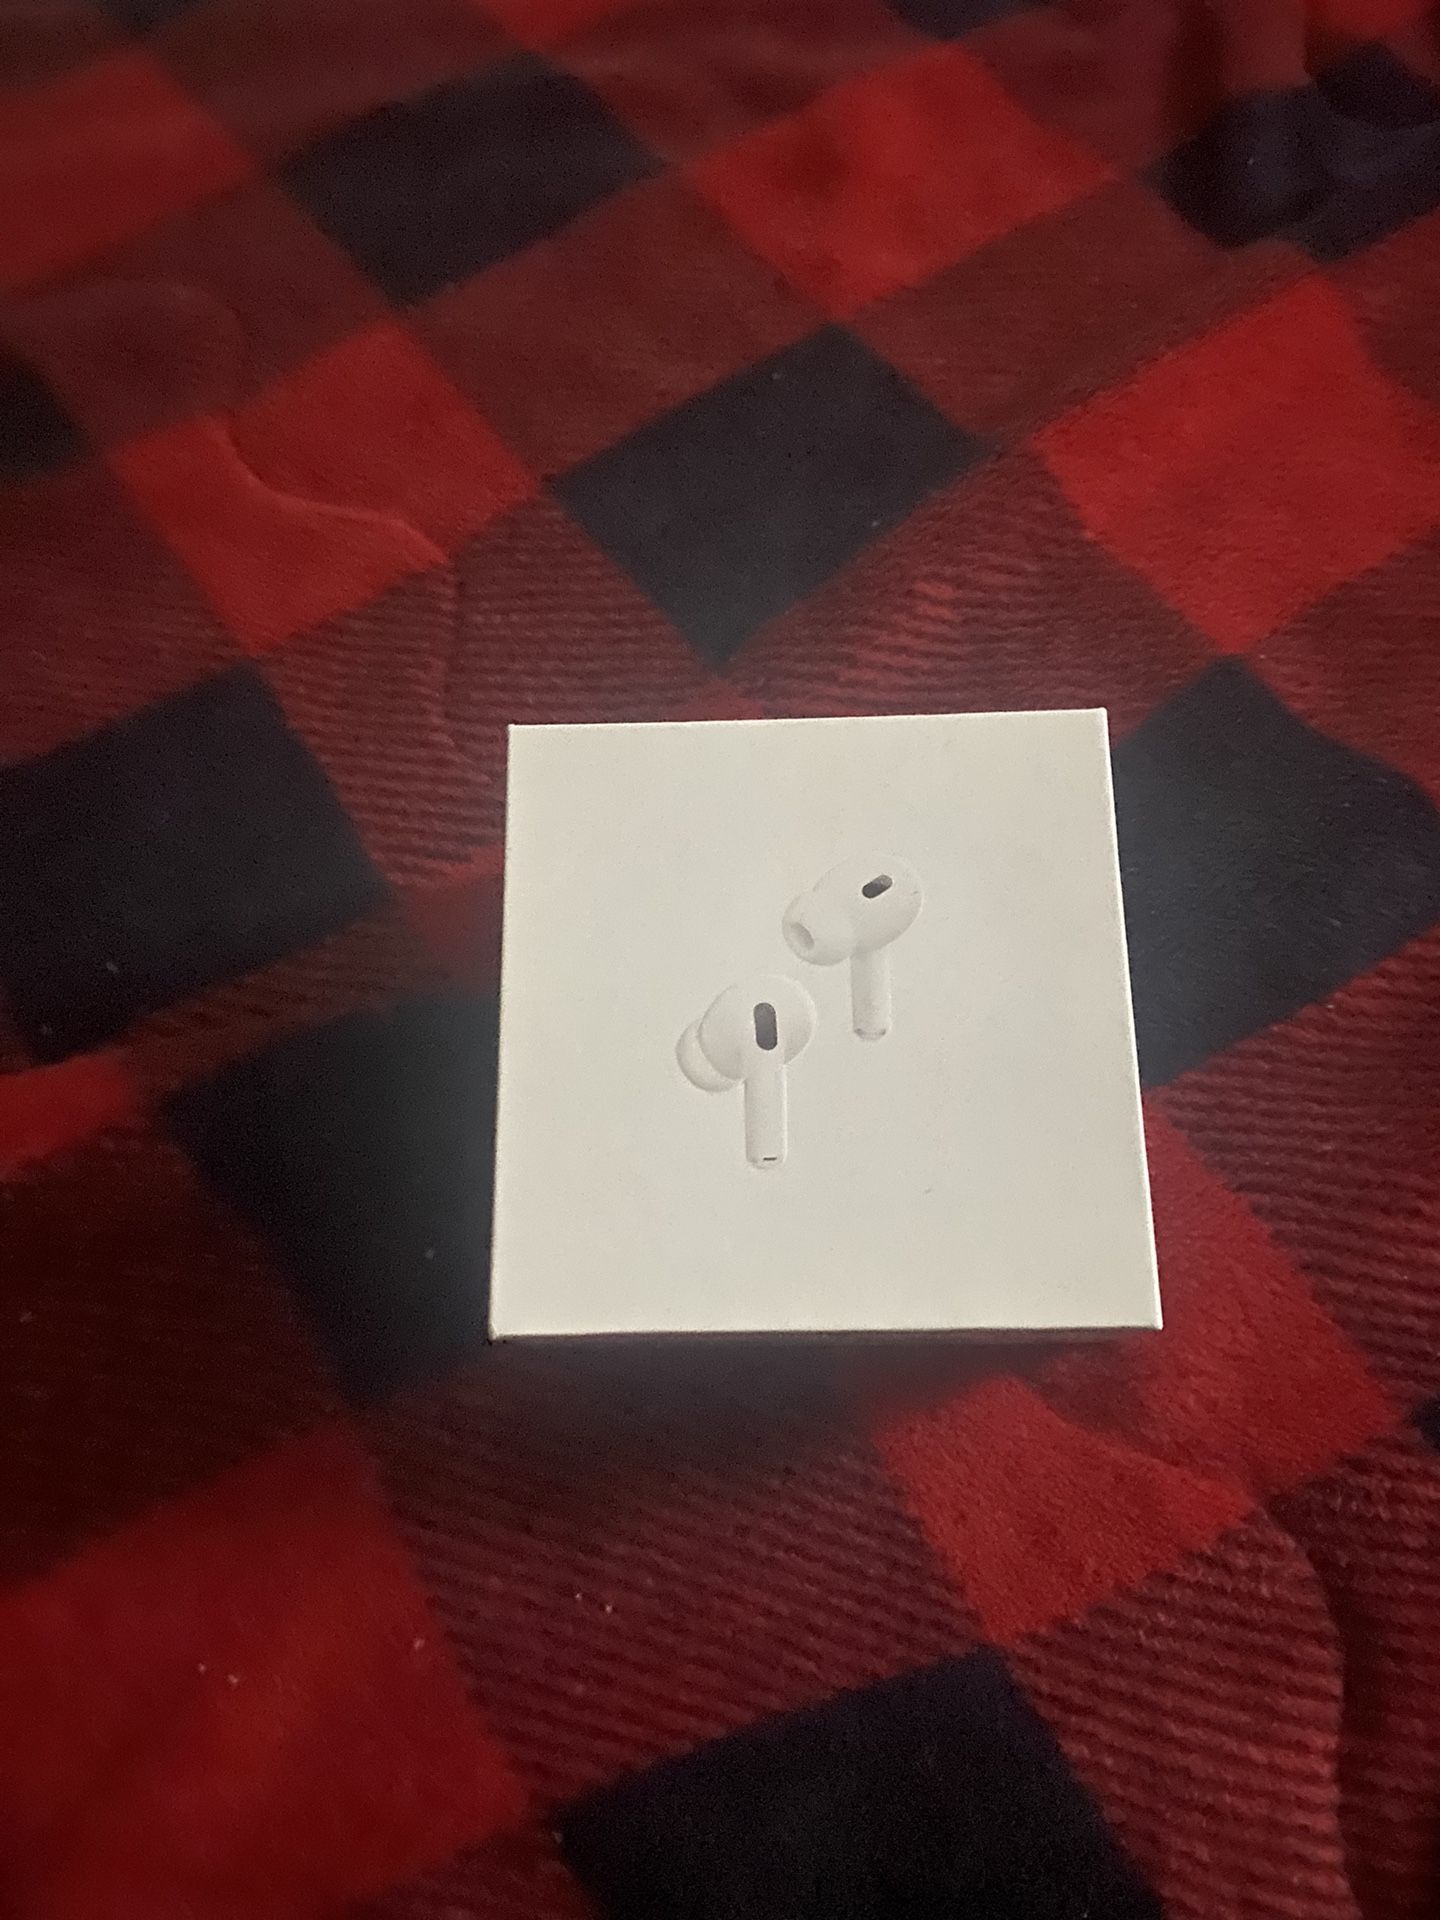 AirPod pros 2nd generation (comes with charger)